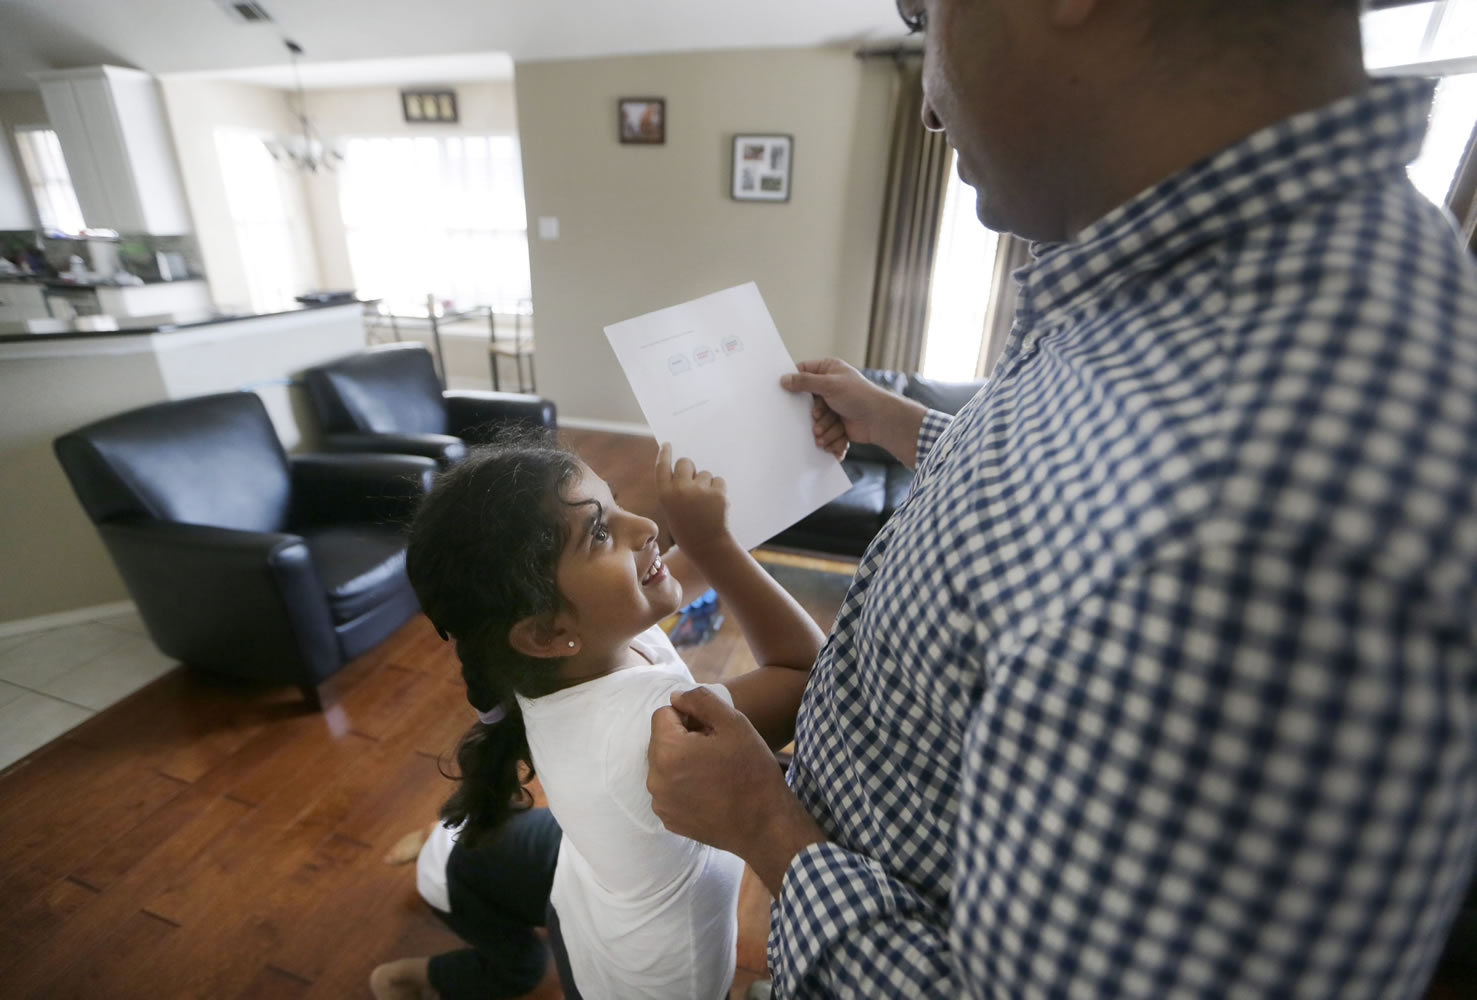 Sita Jaganath, 7, left, shows her father Siddharth Jaganath a math problem she worked out at their home Friday  in Plano, Texas.  U.S. Census Bureau research shows immigrants from China and India, many with student or work visas, have overtaken Mexicans as the largest groups coming into the U.S. Jaganath is an example of the new trend in immigration. He came to the U.S. to earn his master's degree at Southern Methodist University. Instead of returning to India, he built a new life in the U.S.